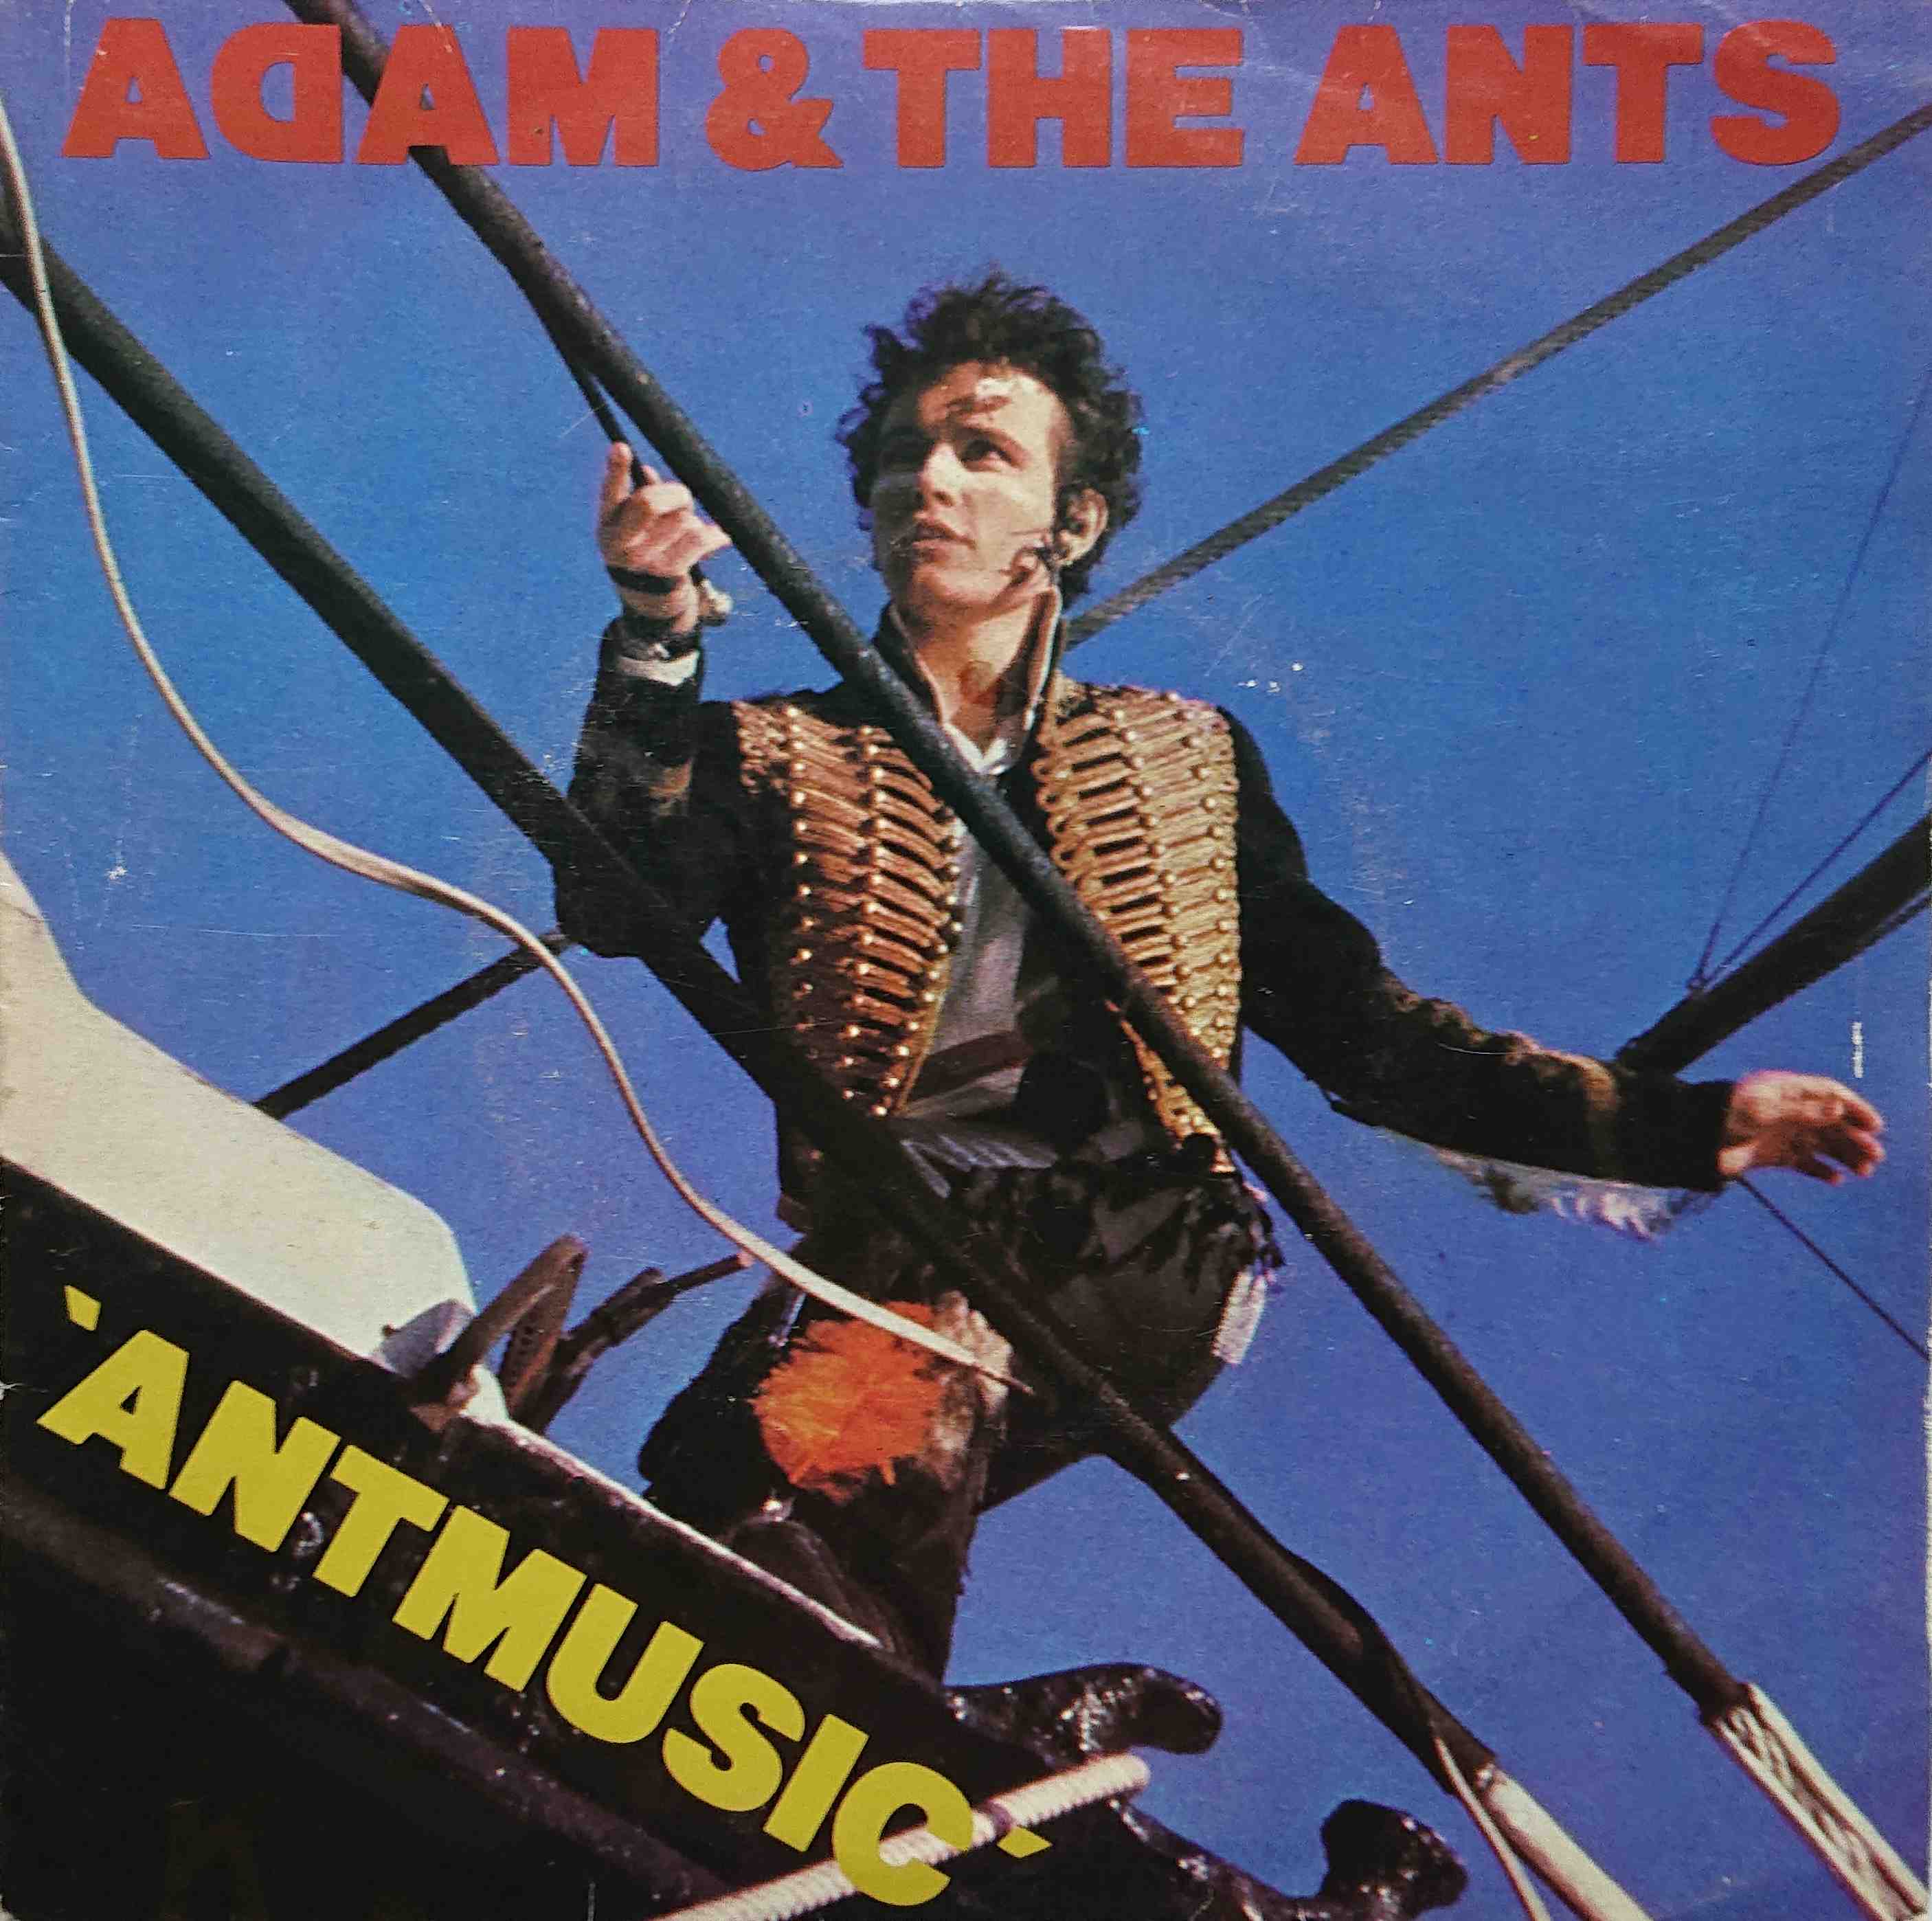 Picture of Antmusic by artist Adam and the Ants 